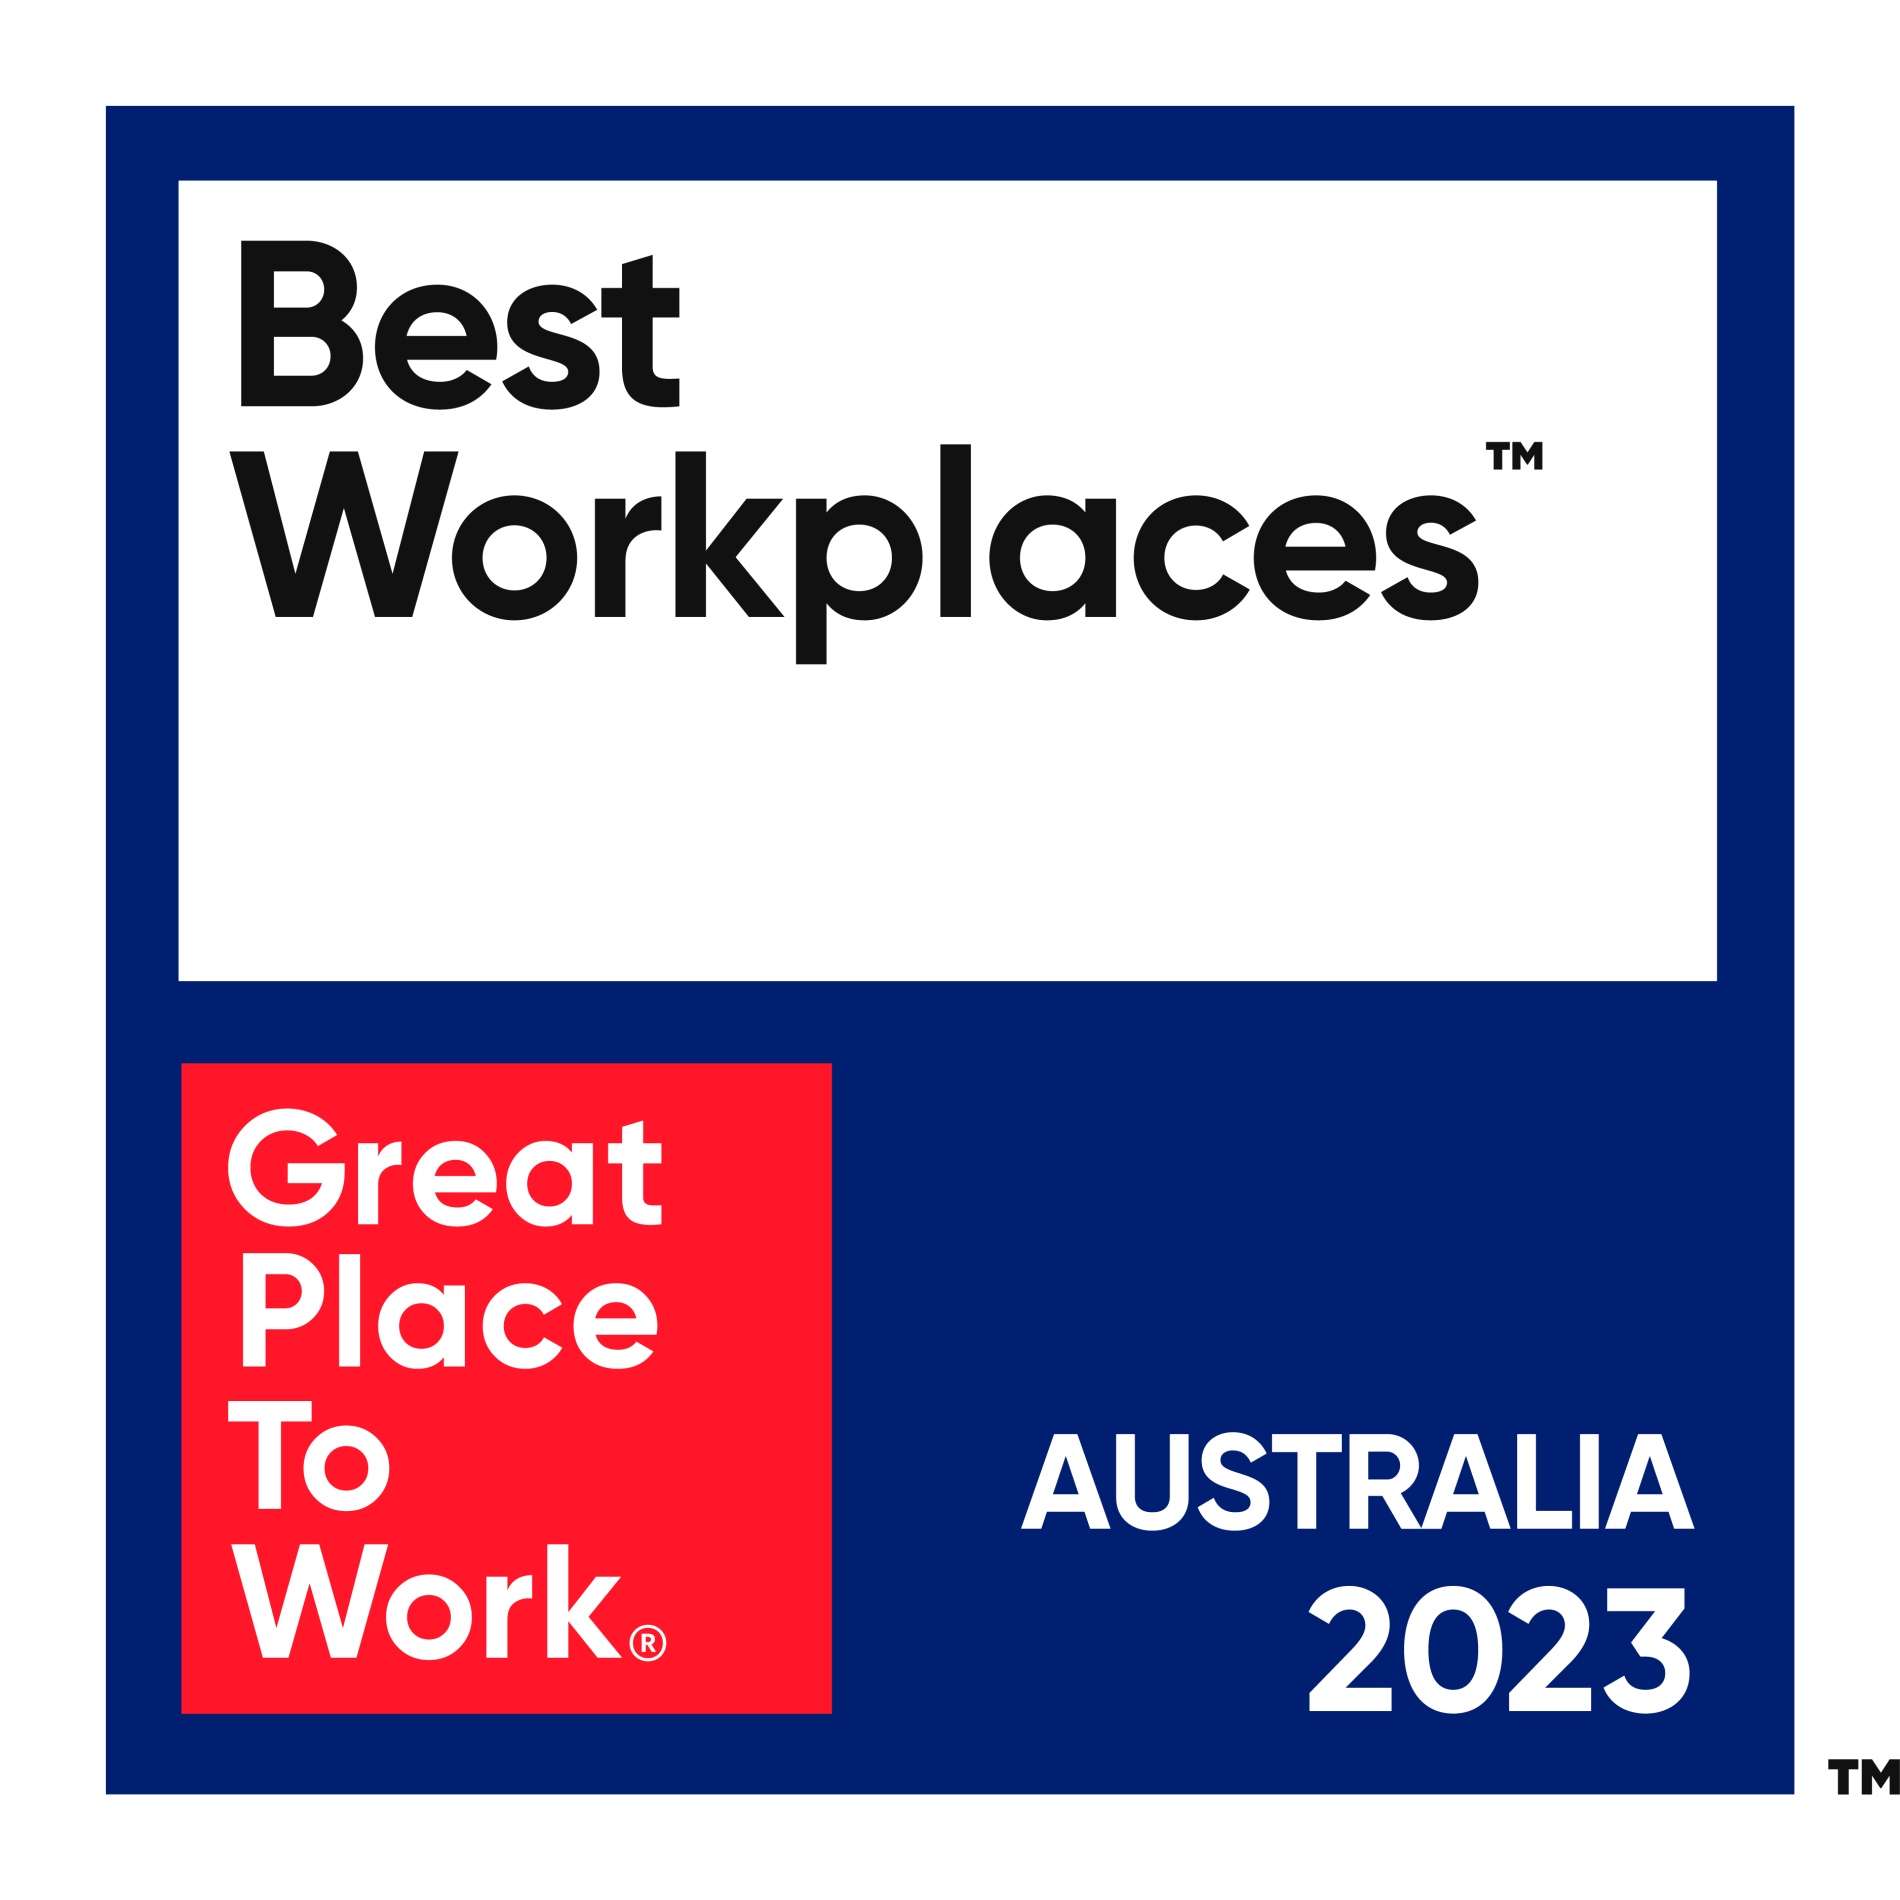 Great Place To Work Best Workplaces certified Australia 2023